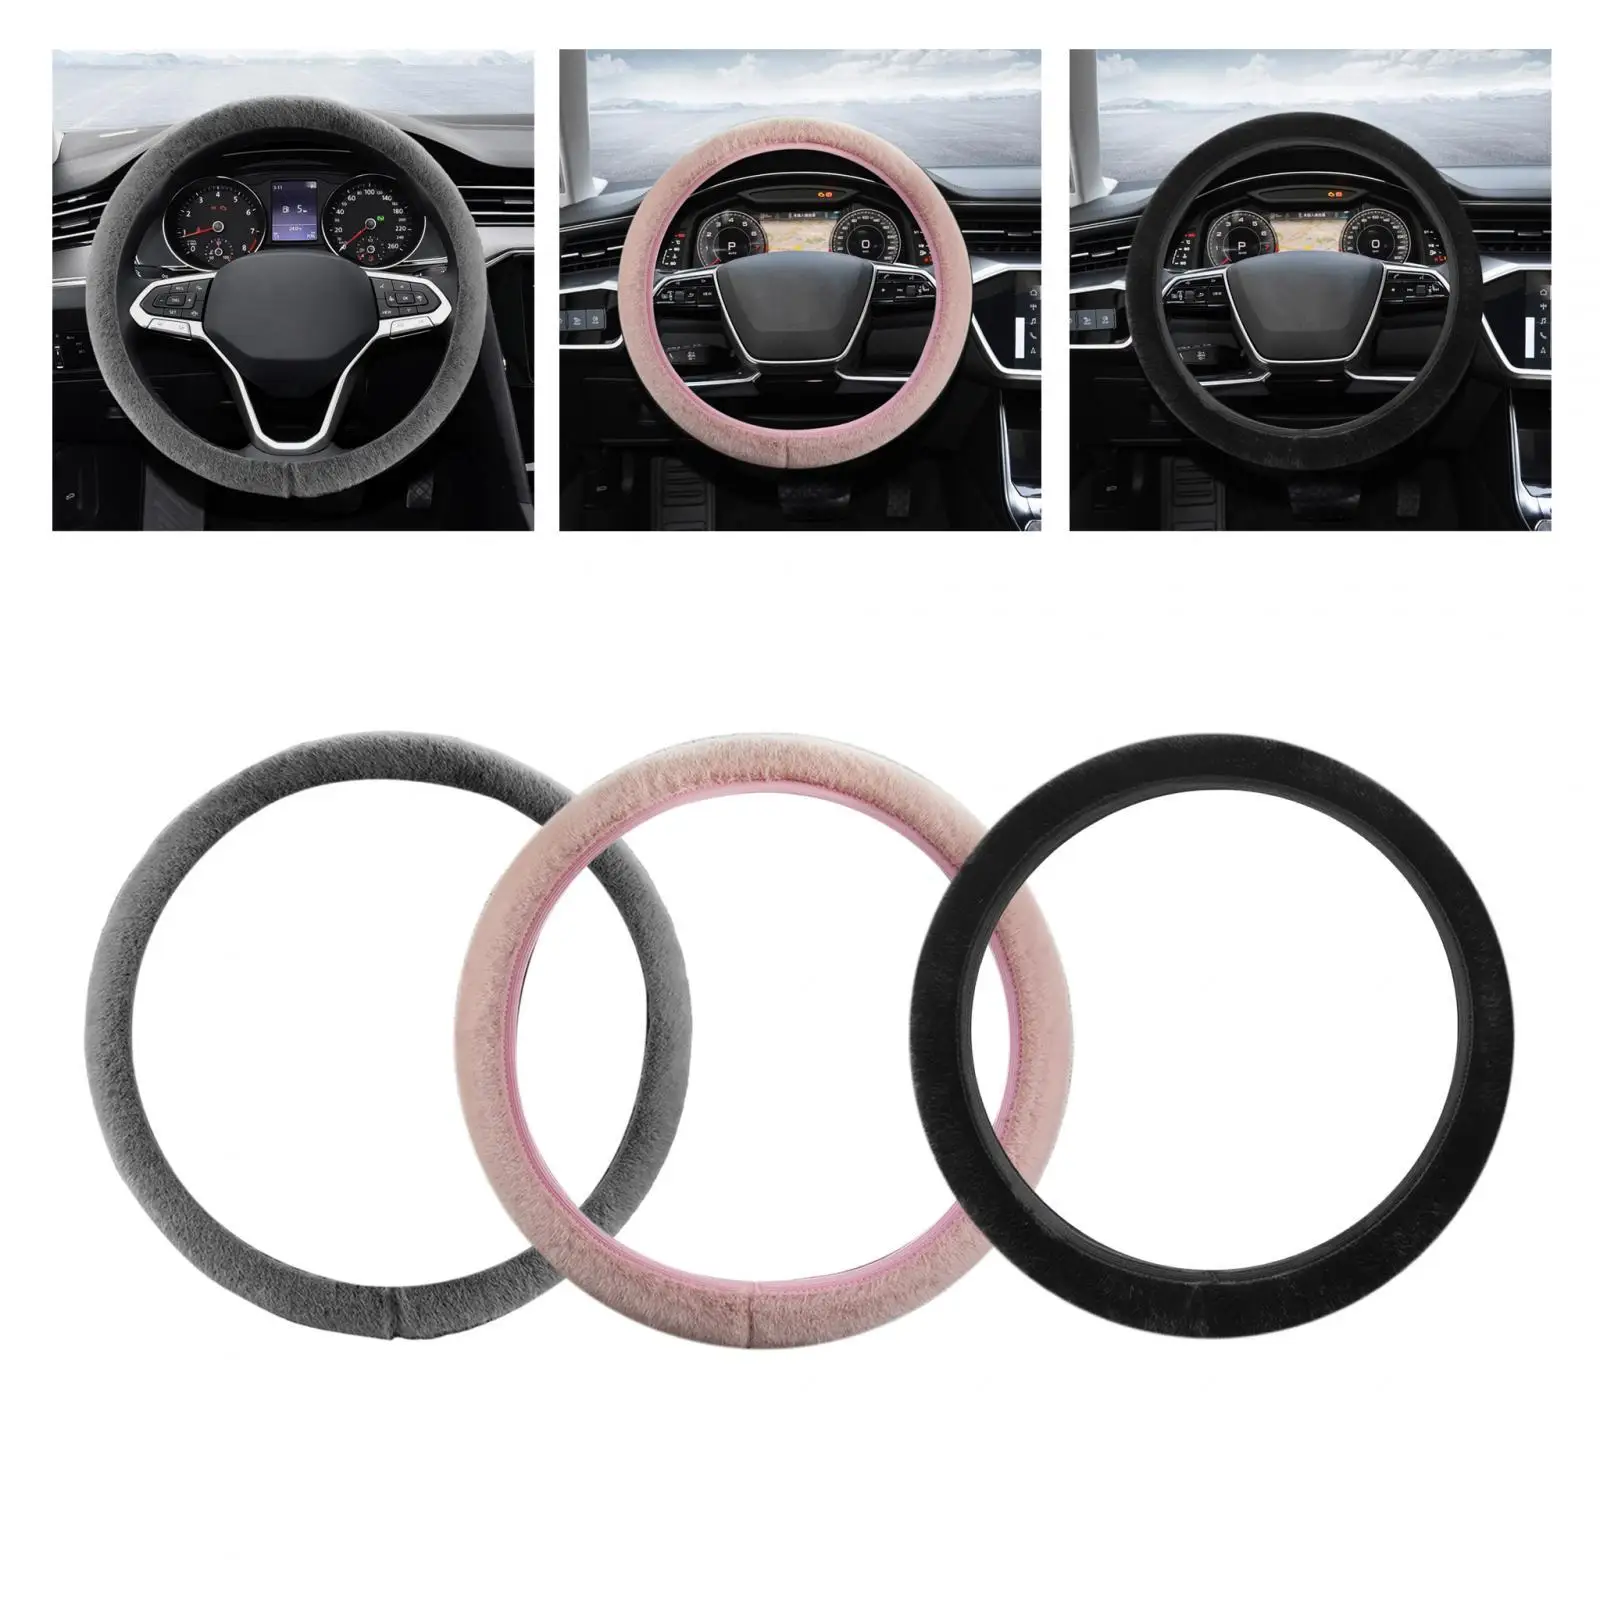 15 inch winter plush steering wheel cover protector, non-slip, easy to install,